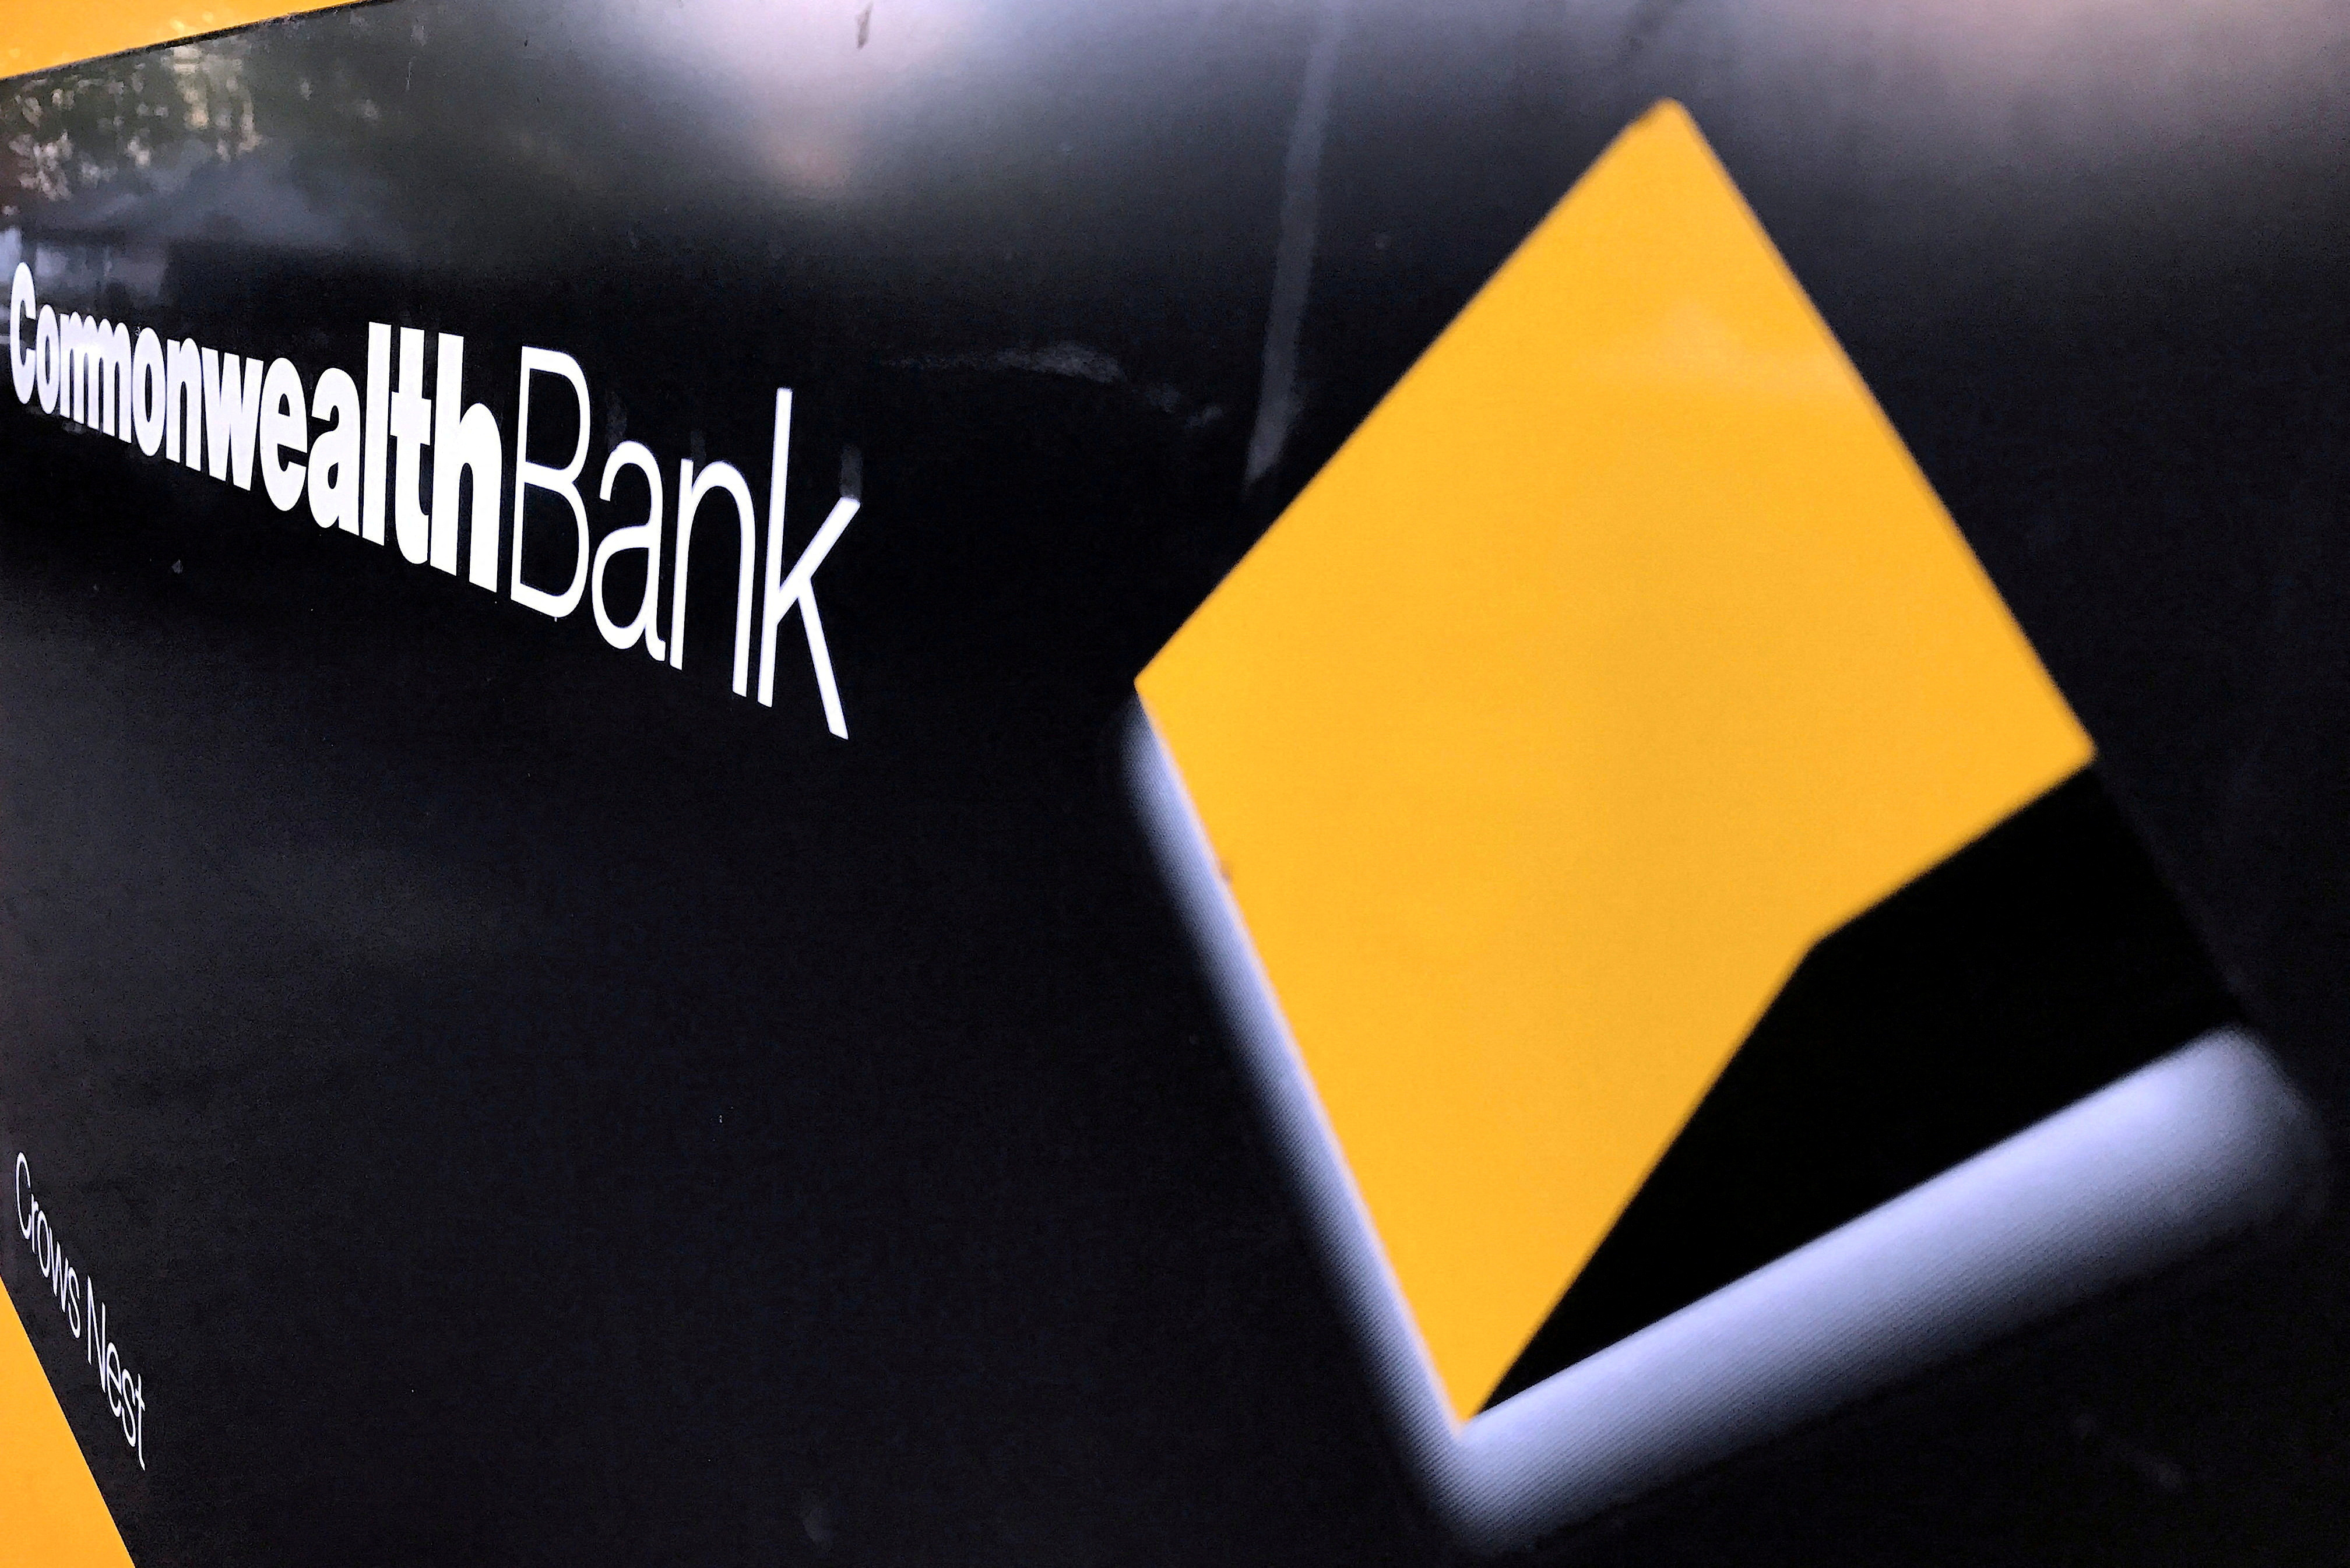 Australia's Commonwealth Bank to Partially Restrict Payments to Crypto Exchanges